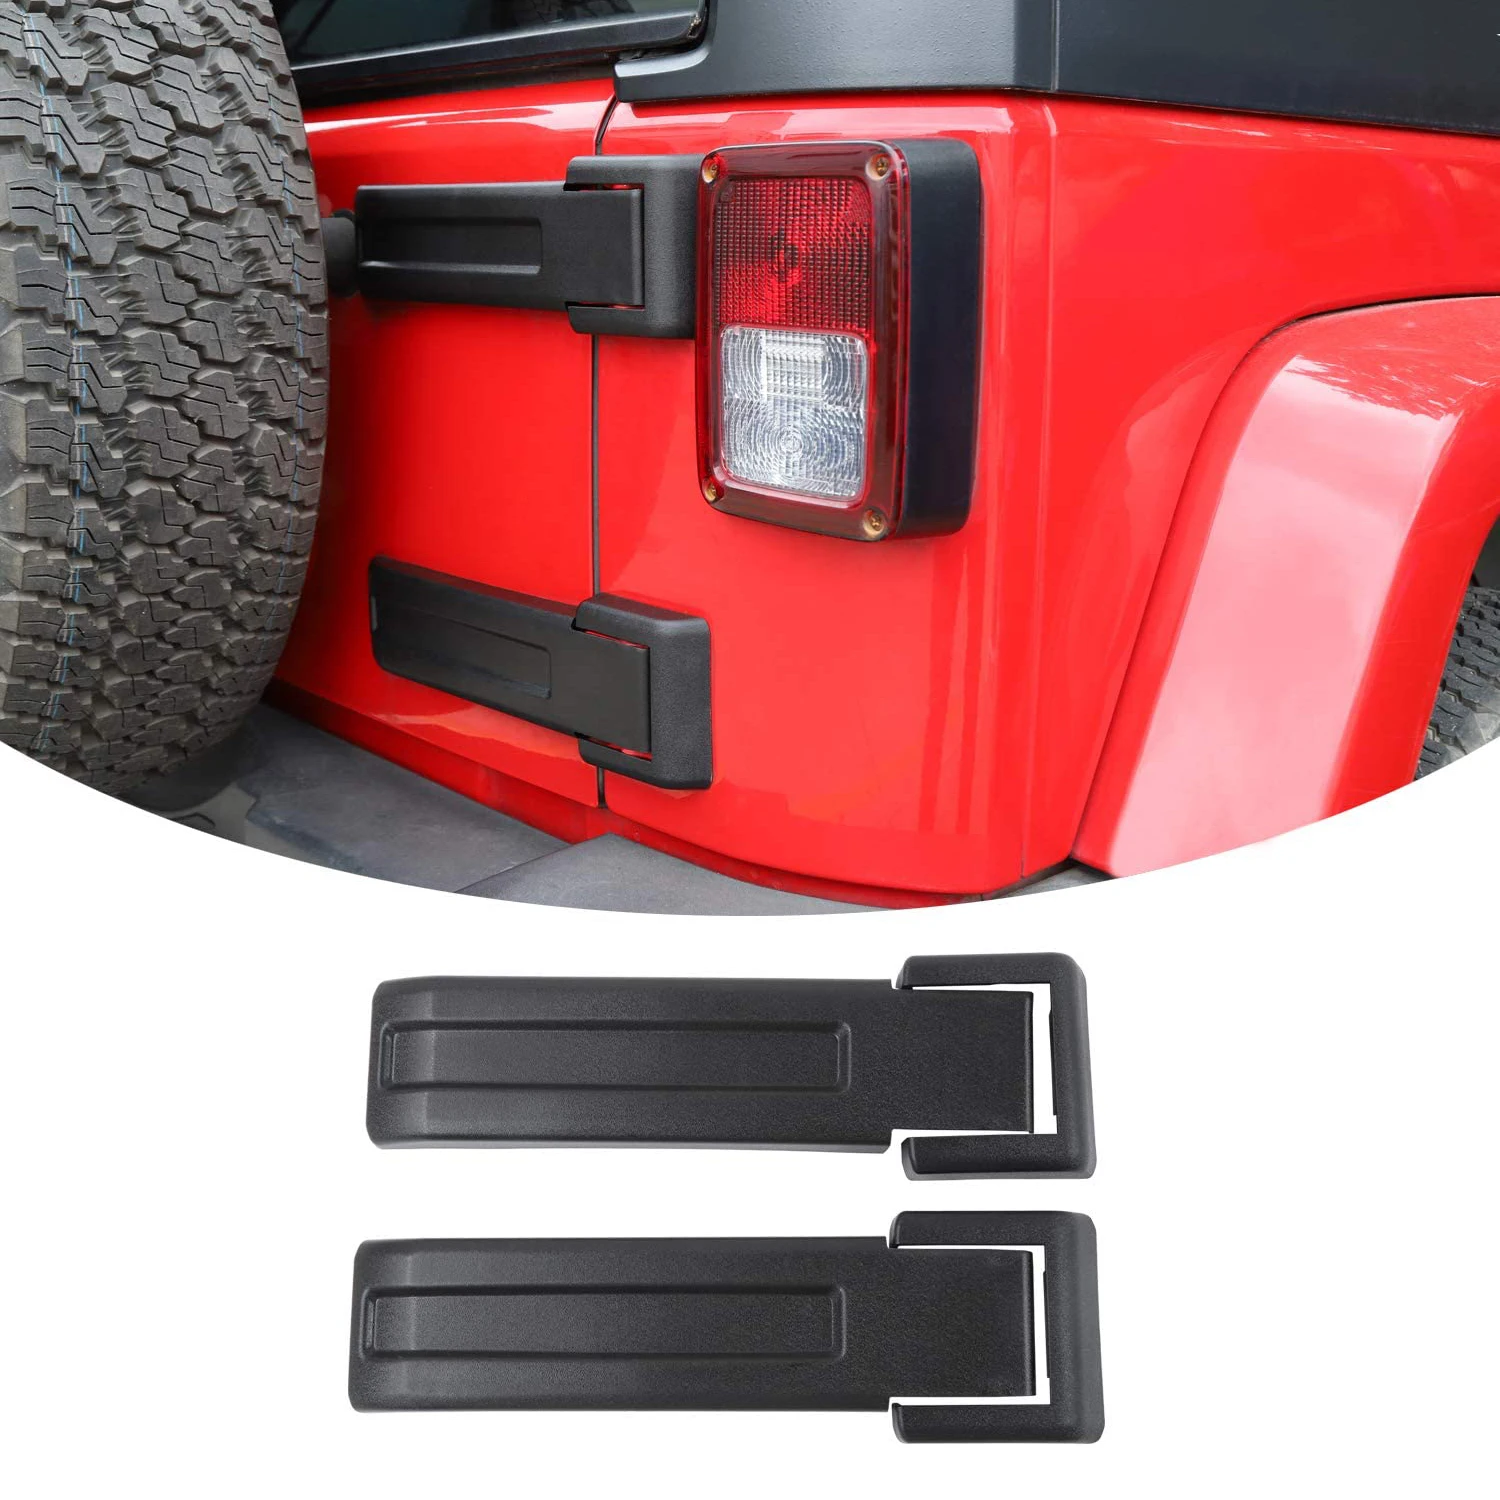 

Rear Spare Tire Tailgate Door Hinge Replacement Cover Liftgate Trim Cover for Jeep Wrangler JK JKU 2007-2017